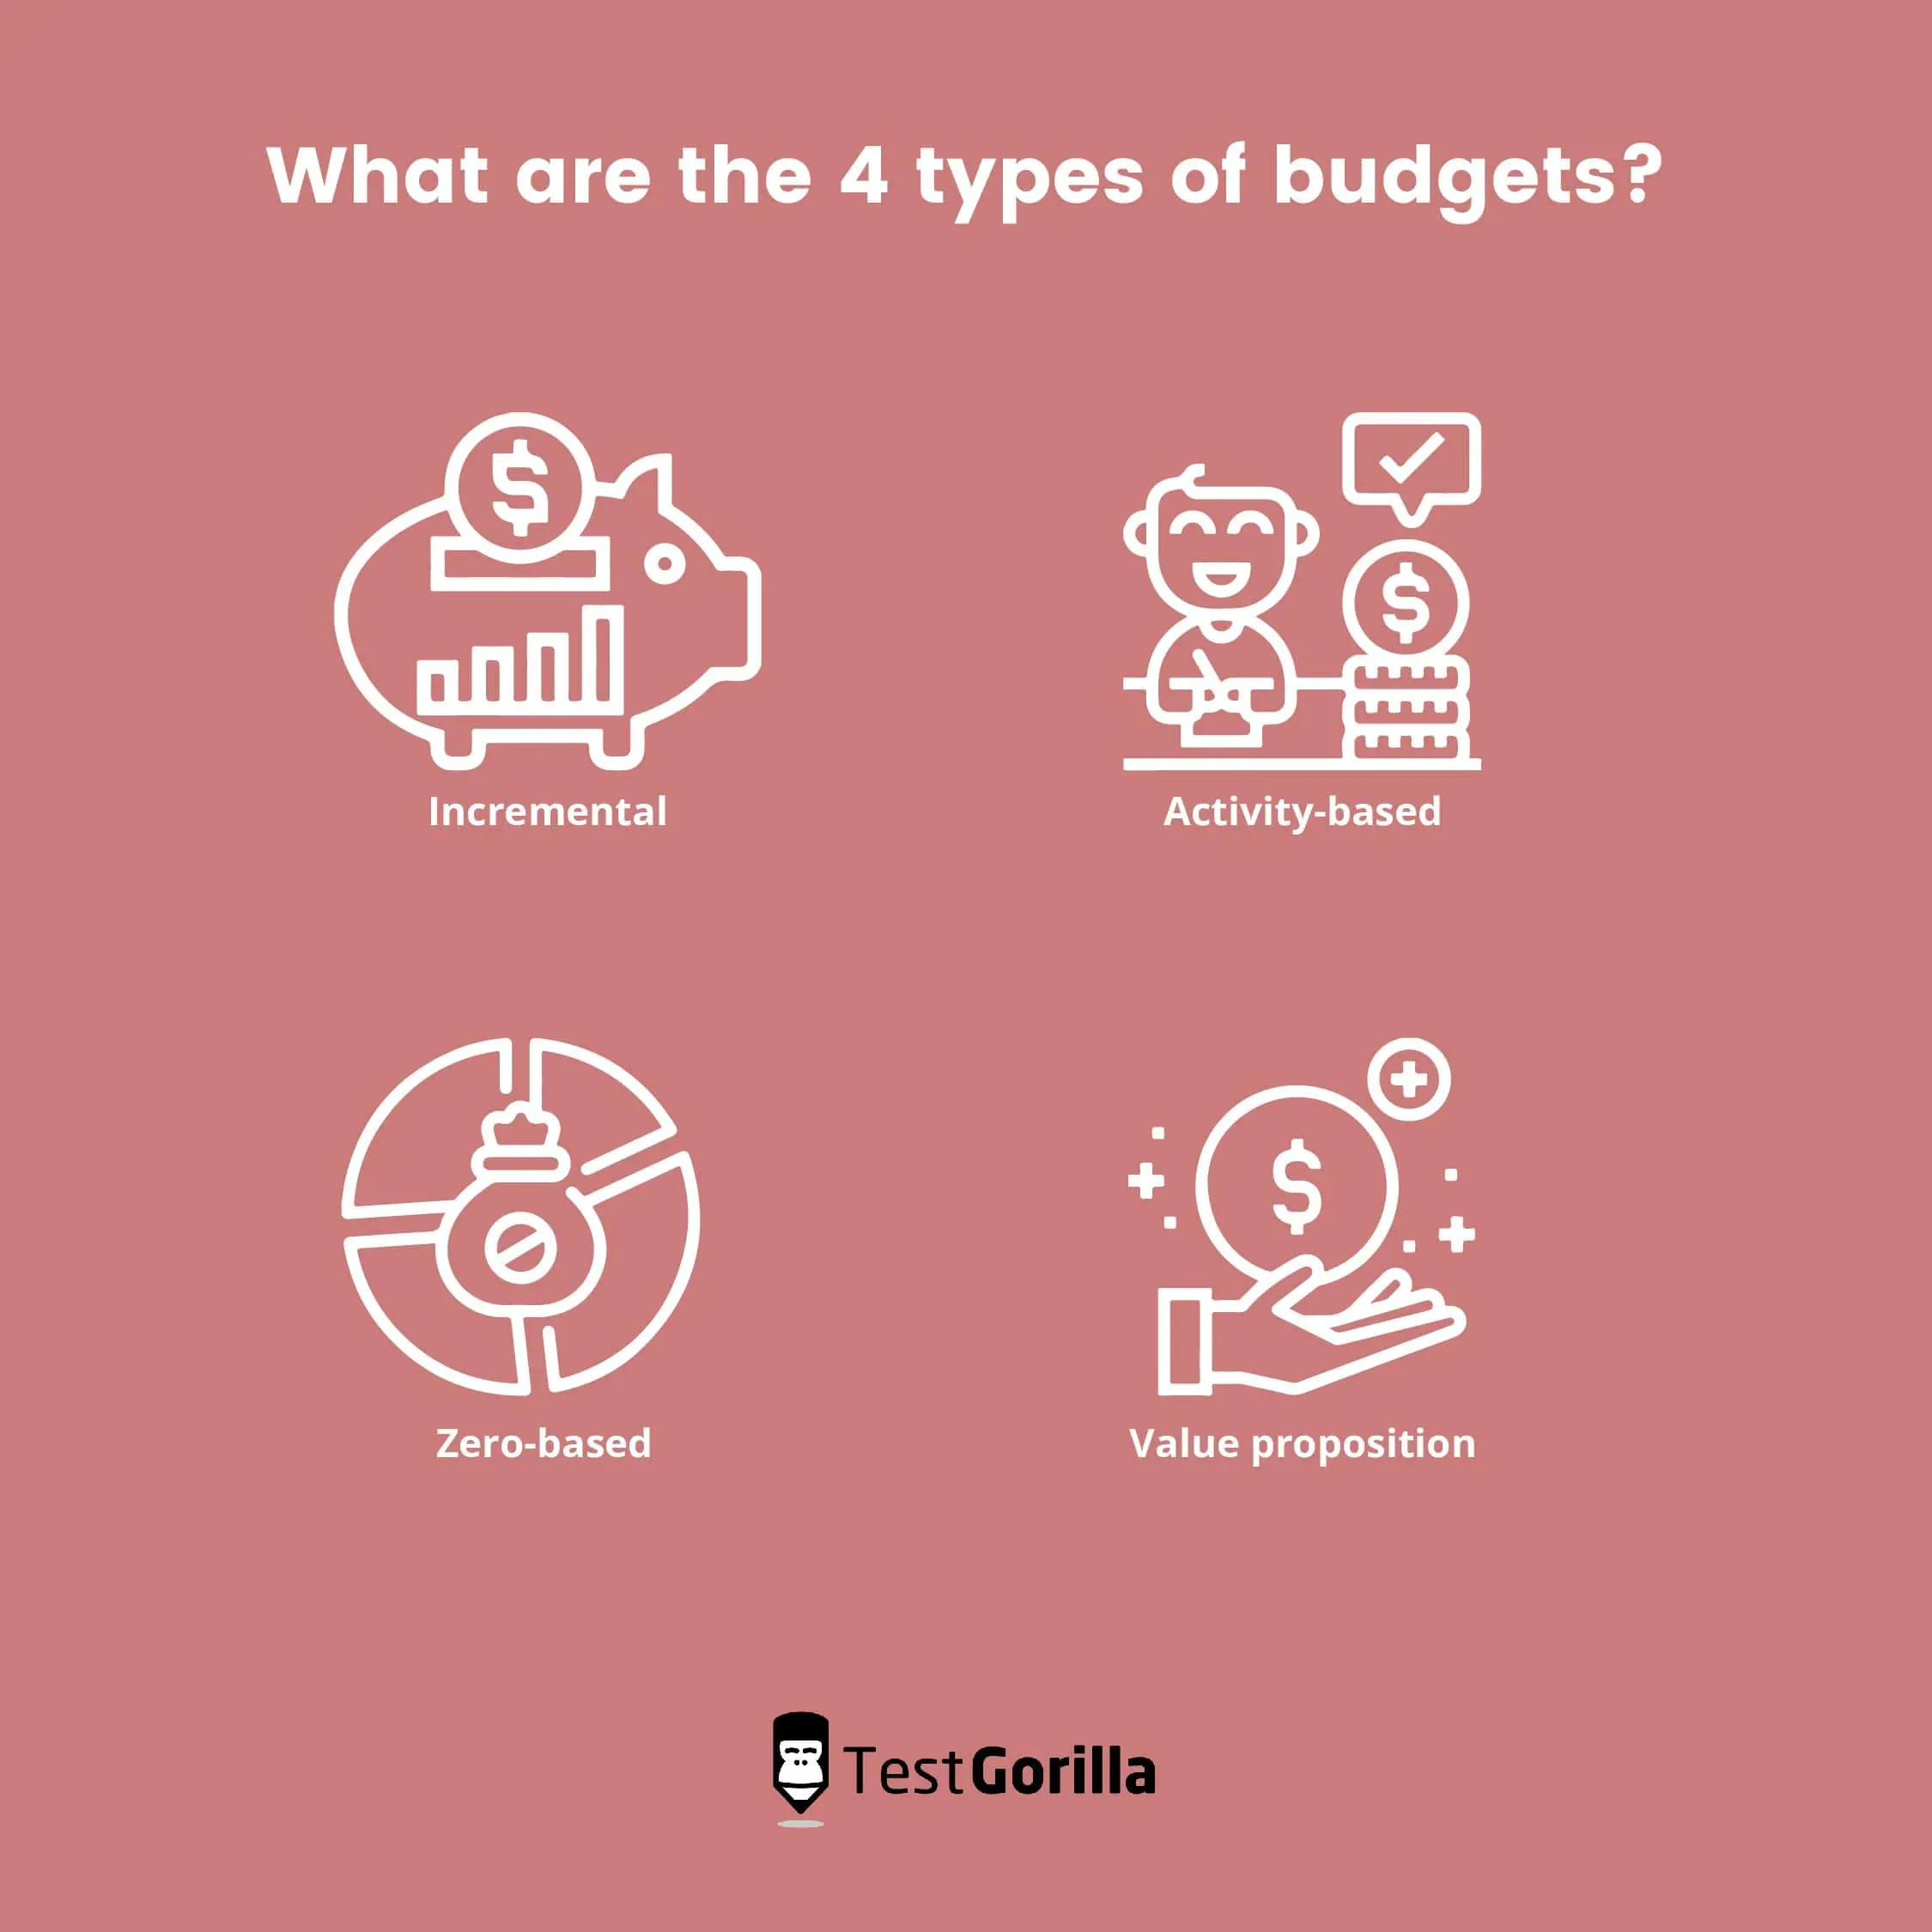 What are the 4 types of budgets?